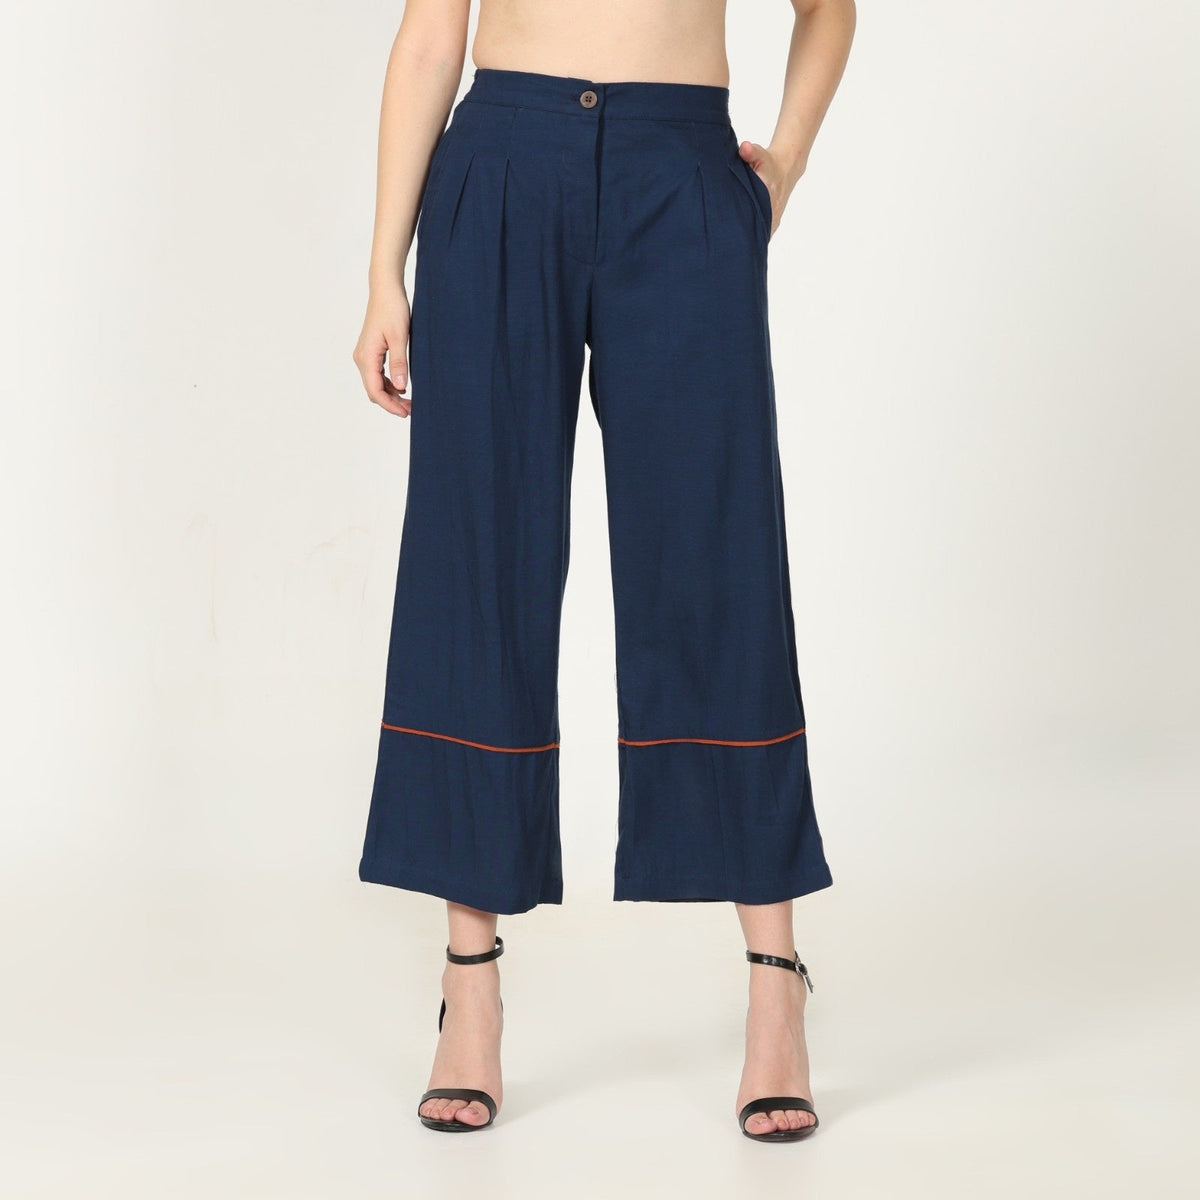 Barrel Leg Pants- Navy Blue With Autumn Rust Edging - Limited Edition